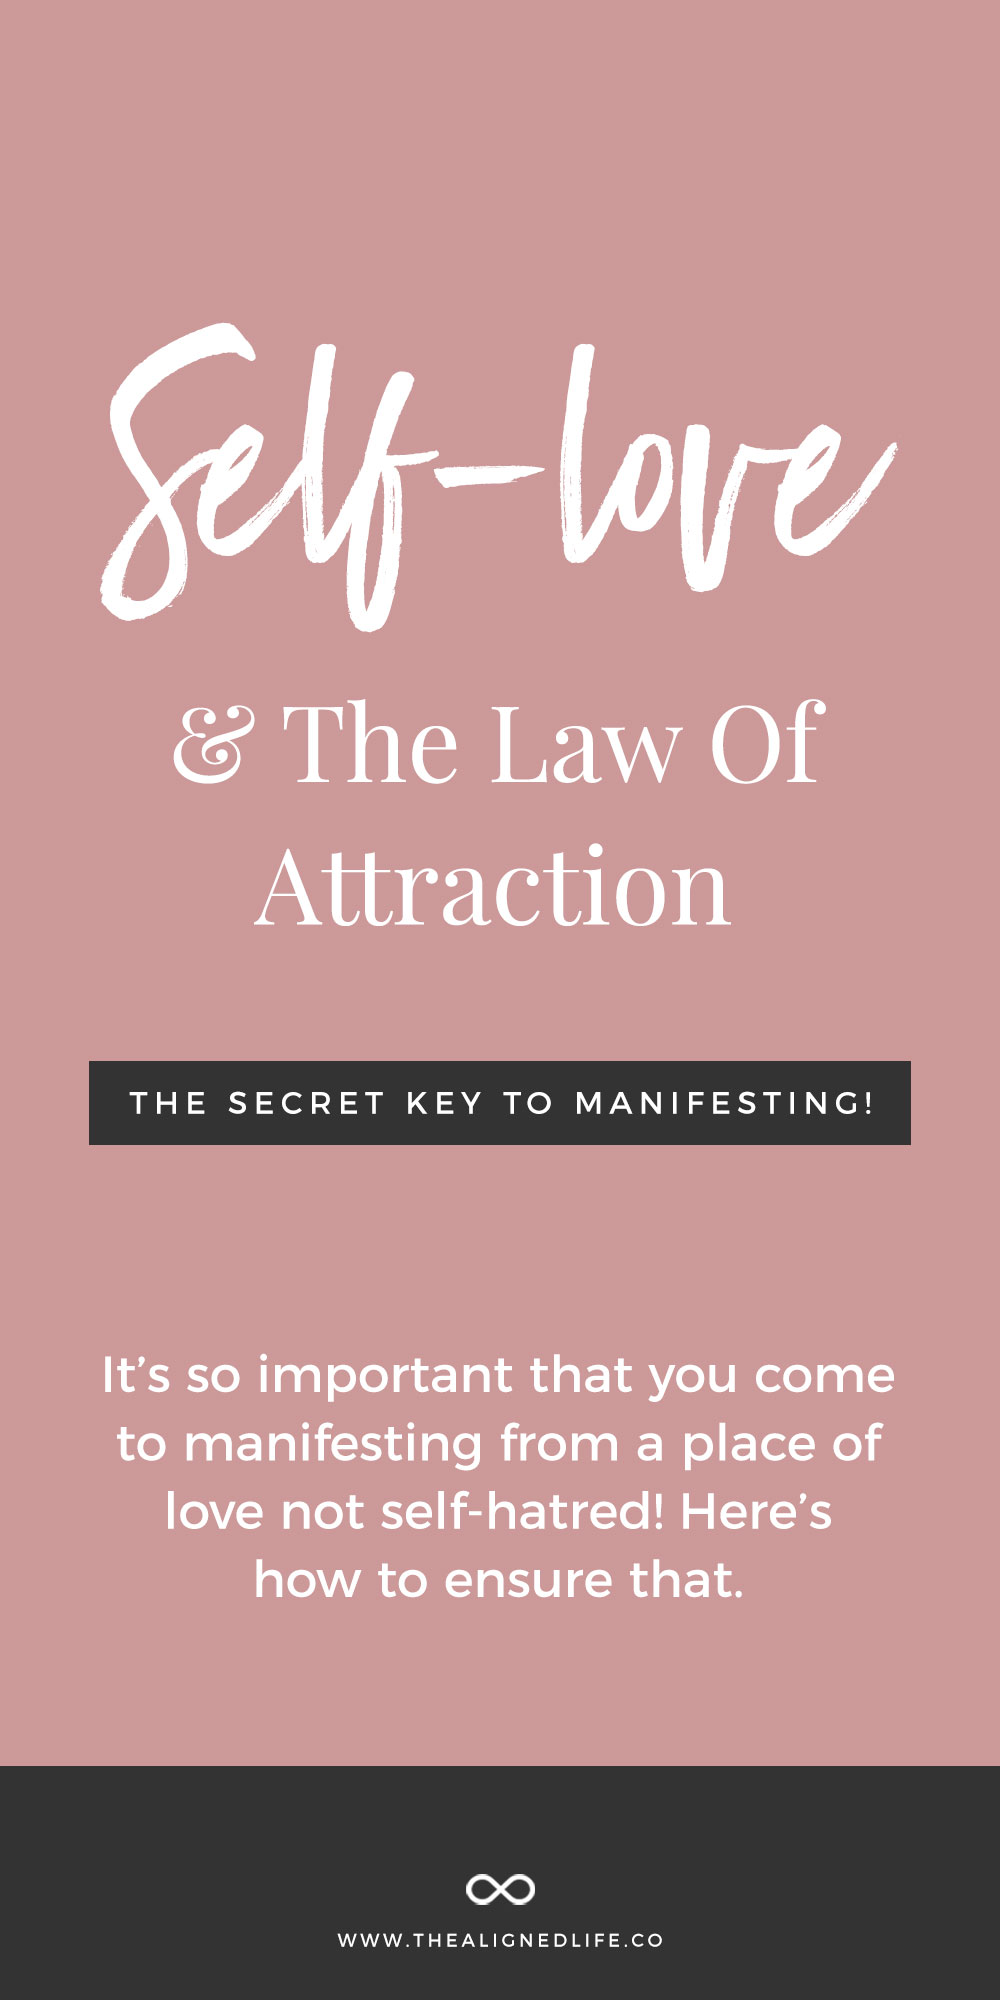 Self Love + The Law of Attraction